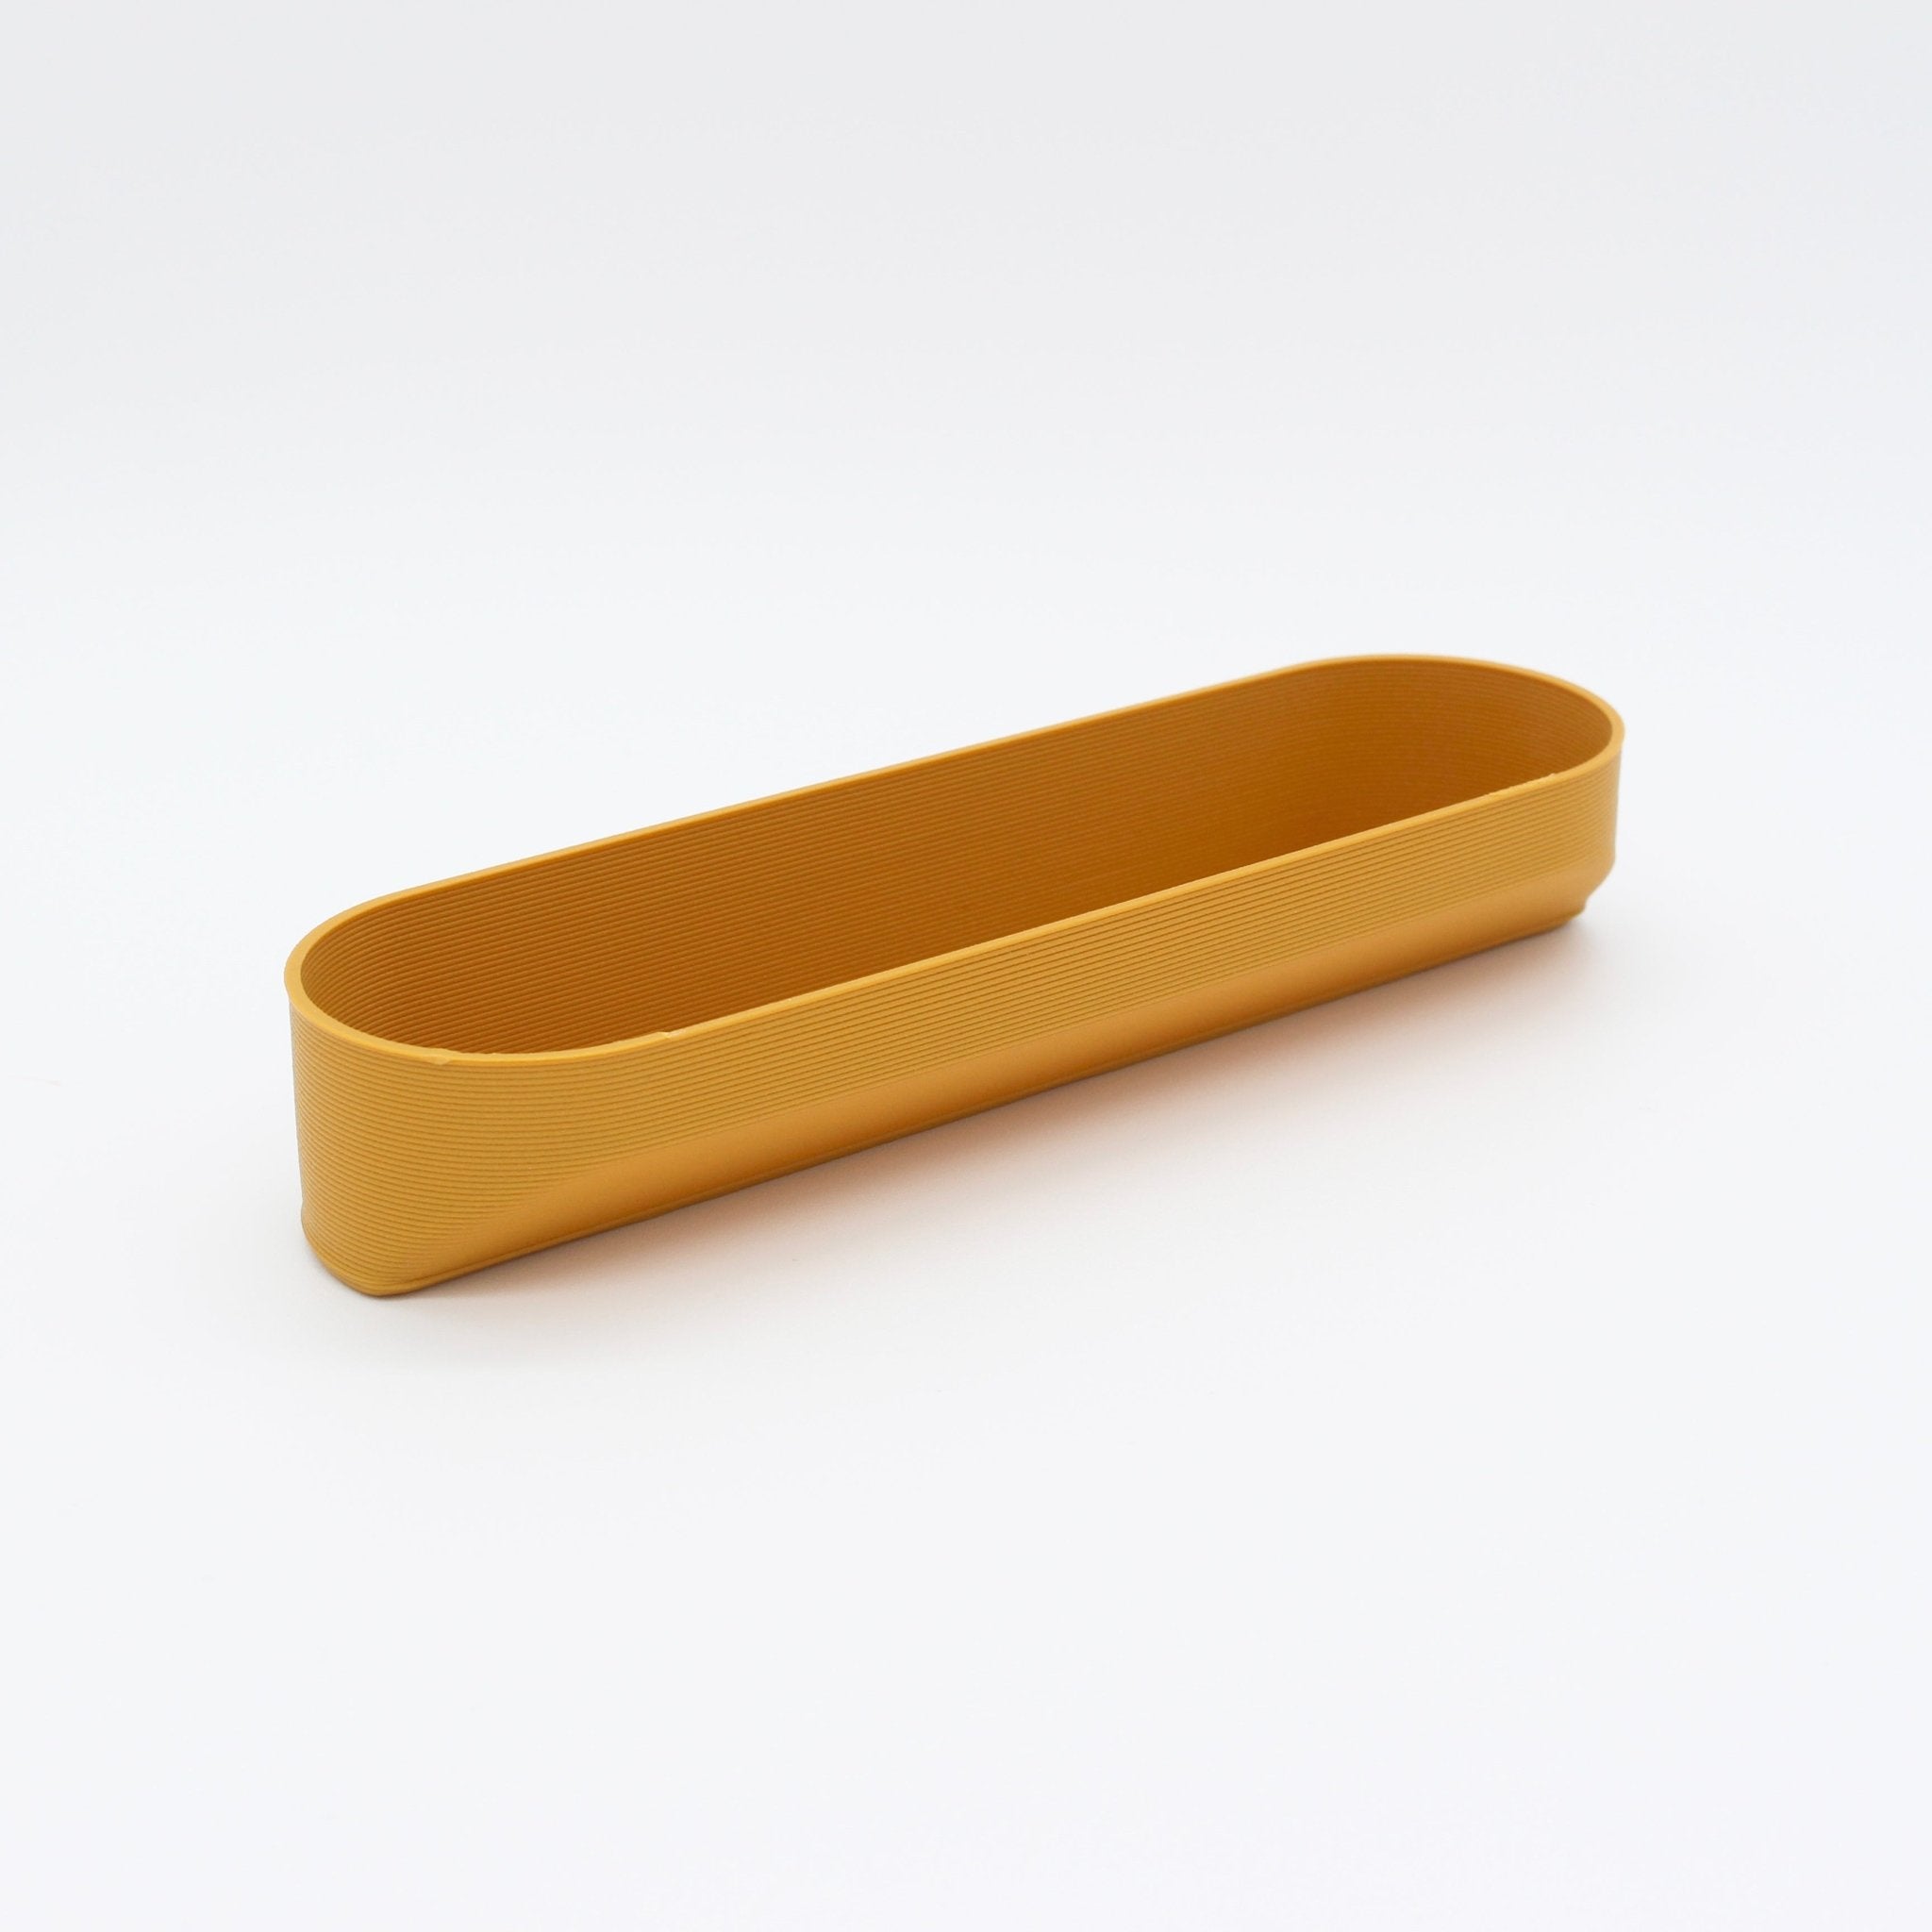 Pefto Pencil Tray Ochre, 3D Printed Recycled Plastic, Deme Design #color_ochre